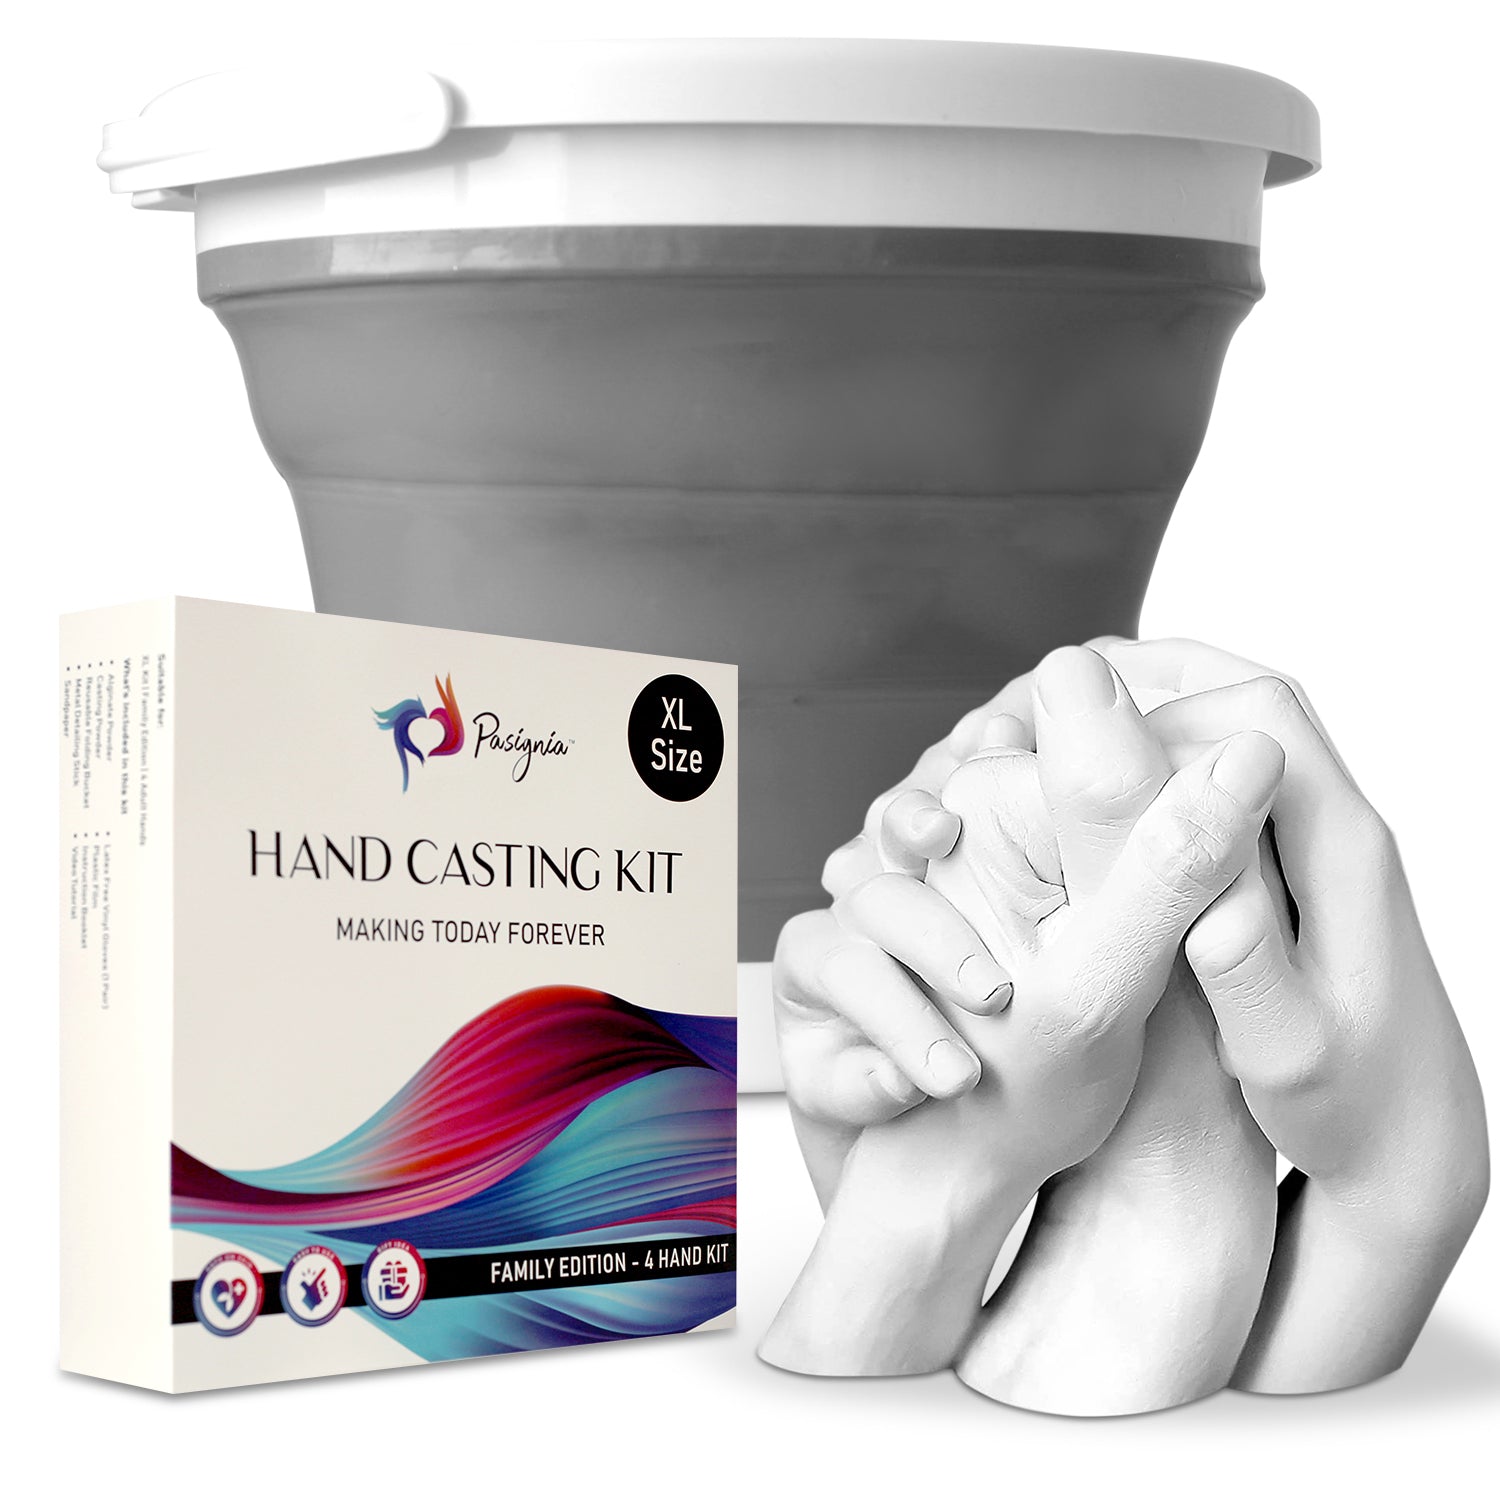 Fun Hand-Casting Kits at Wholesale Offers 